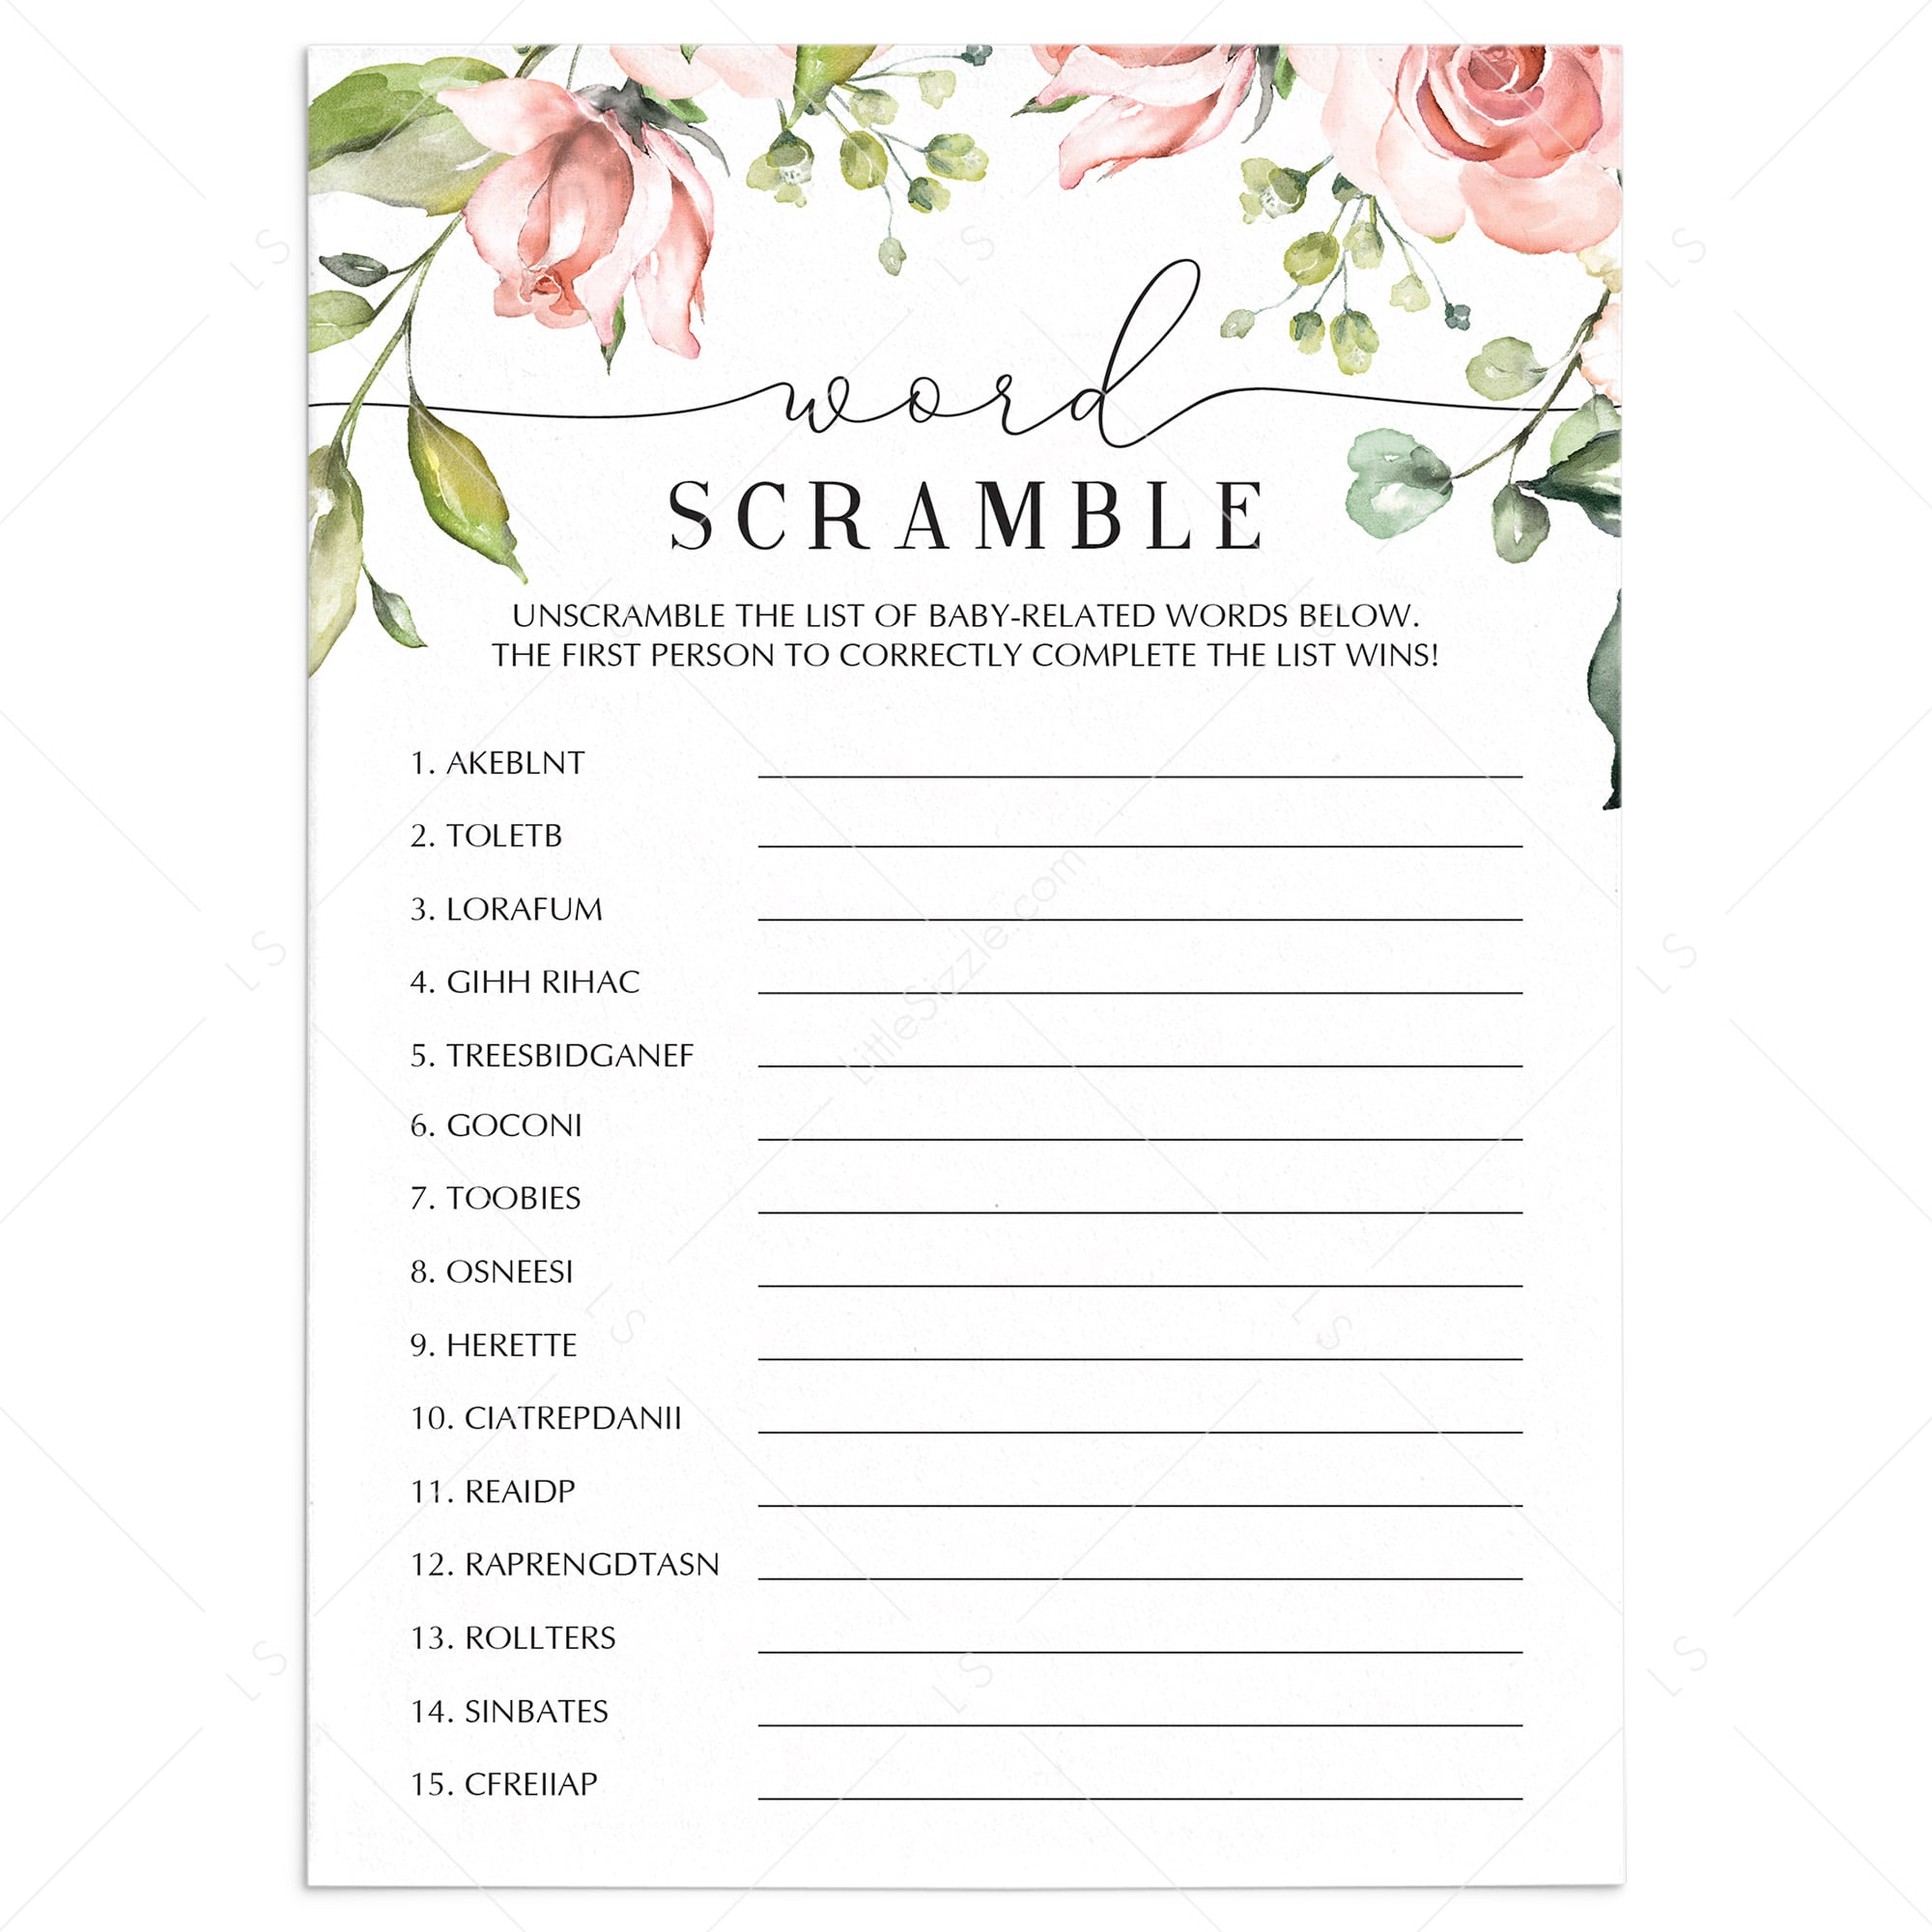 Printable baby shower game word scramble garden theme by LittleSizzle